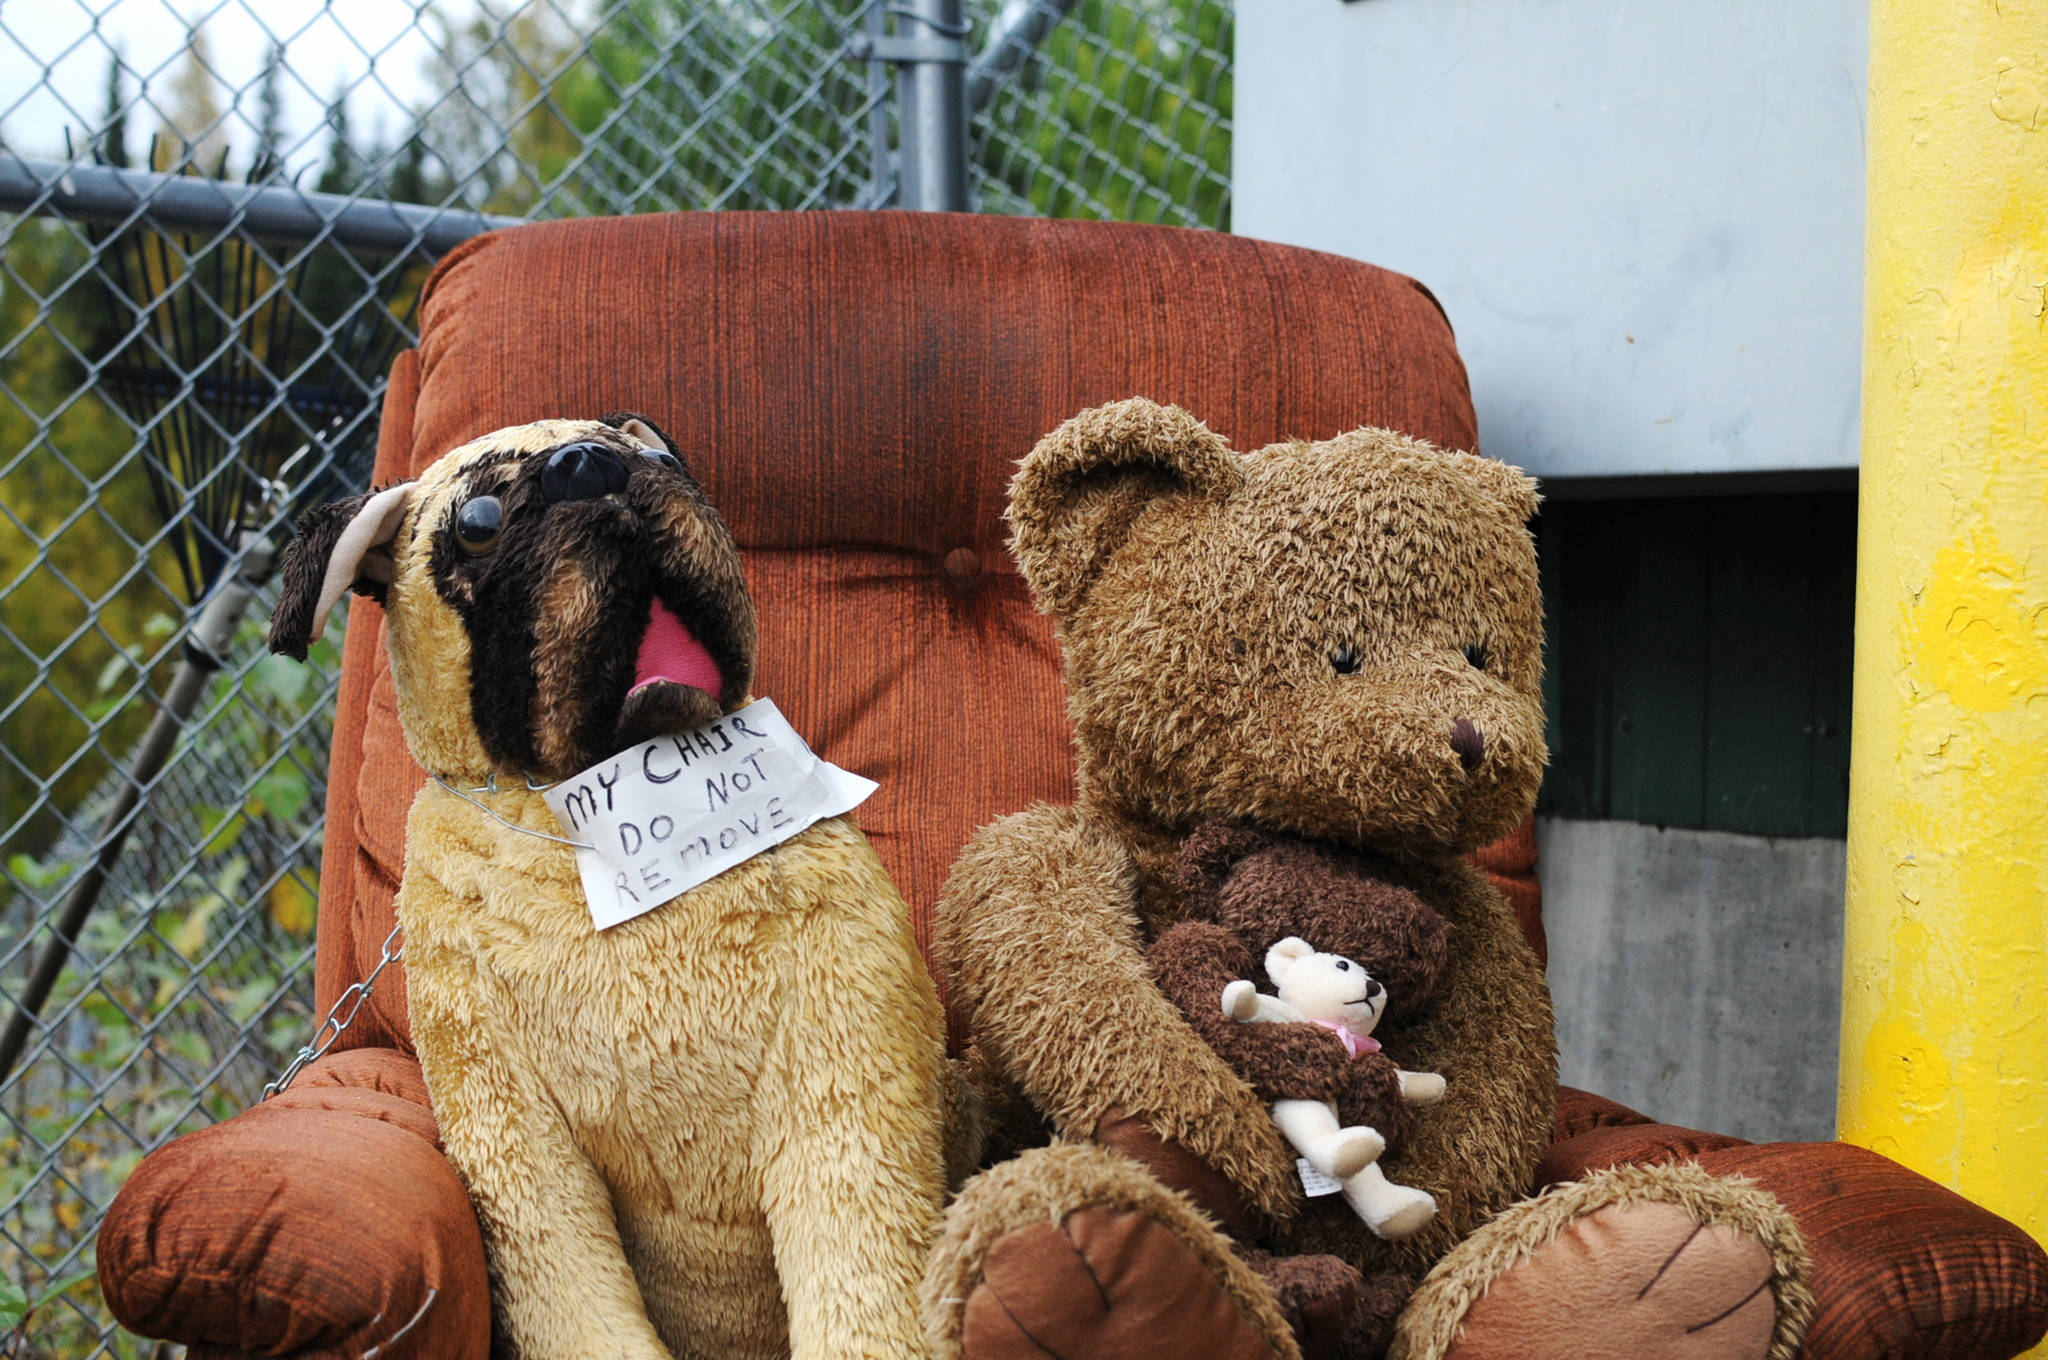 A stuffed dog and two teddy bears lounge on an armchair near the dropoff point for solid waste at the Sterling Transfer Site on Saturday, Sept. 16, 2017 near Sterling, Alaska. The attendants at the transfer site, where trash is picked up and taken to Central Peninsula Landfill, rescue stuffed animals from the trash and giving them new life in the “Sterling Zoo,” where they rest in the bushes and trees surrouding the transfer site to greet visitors throughout the summer. They go into “hibernation” in the winter, resting on a shelf to stay dry before reappearing the following summer. (Photo by Elizabeth Earl/Peninsula Clarion)